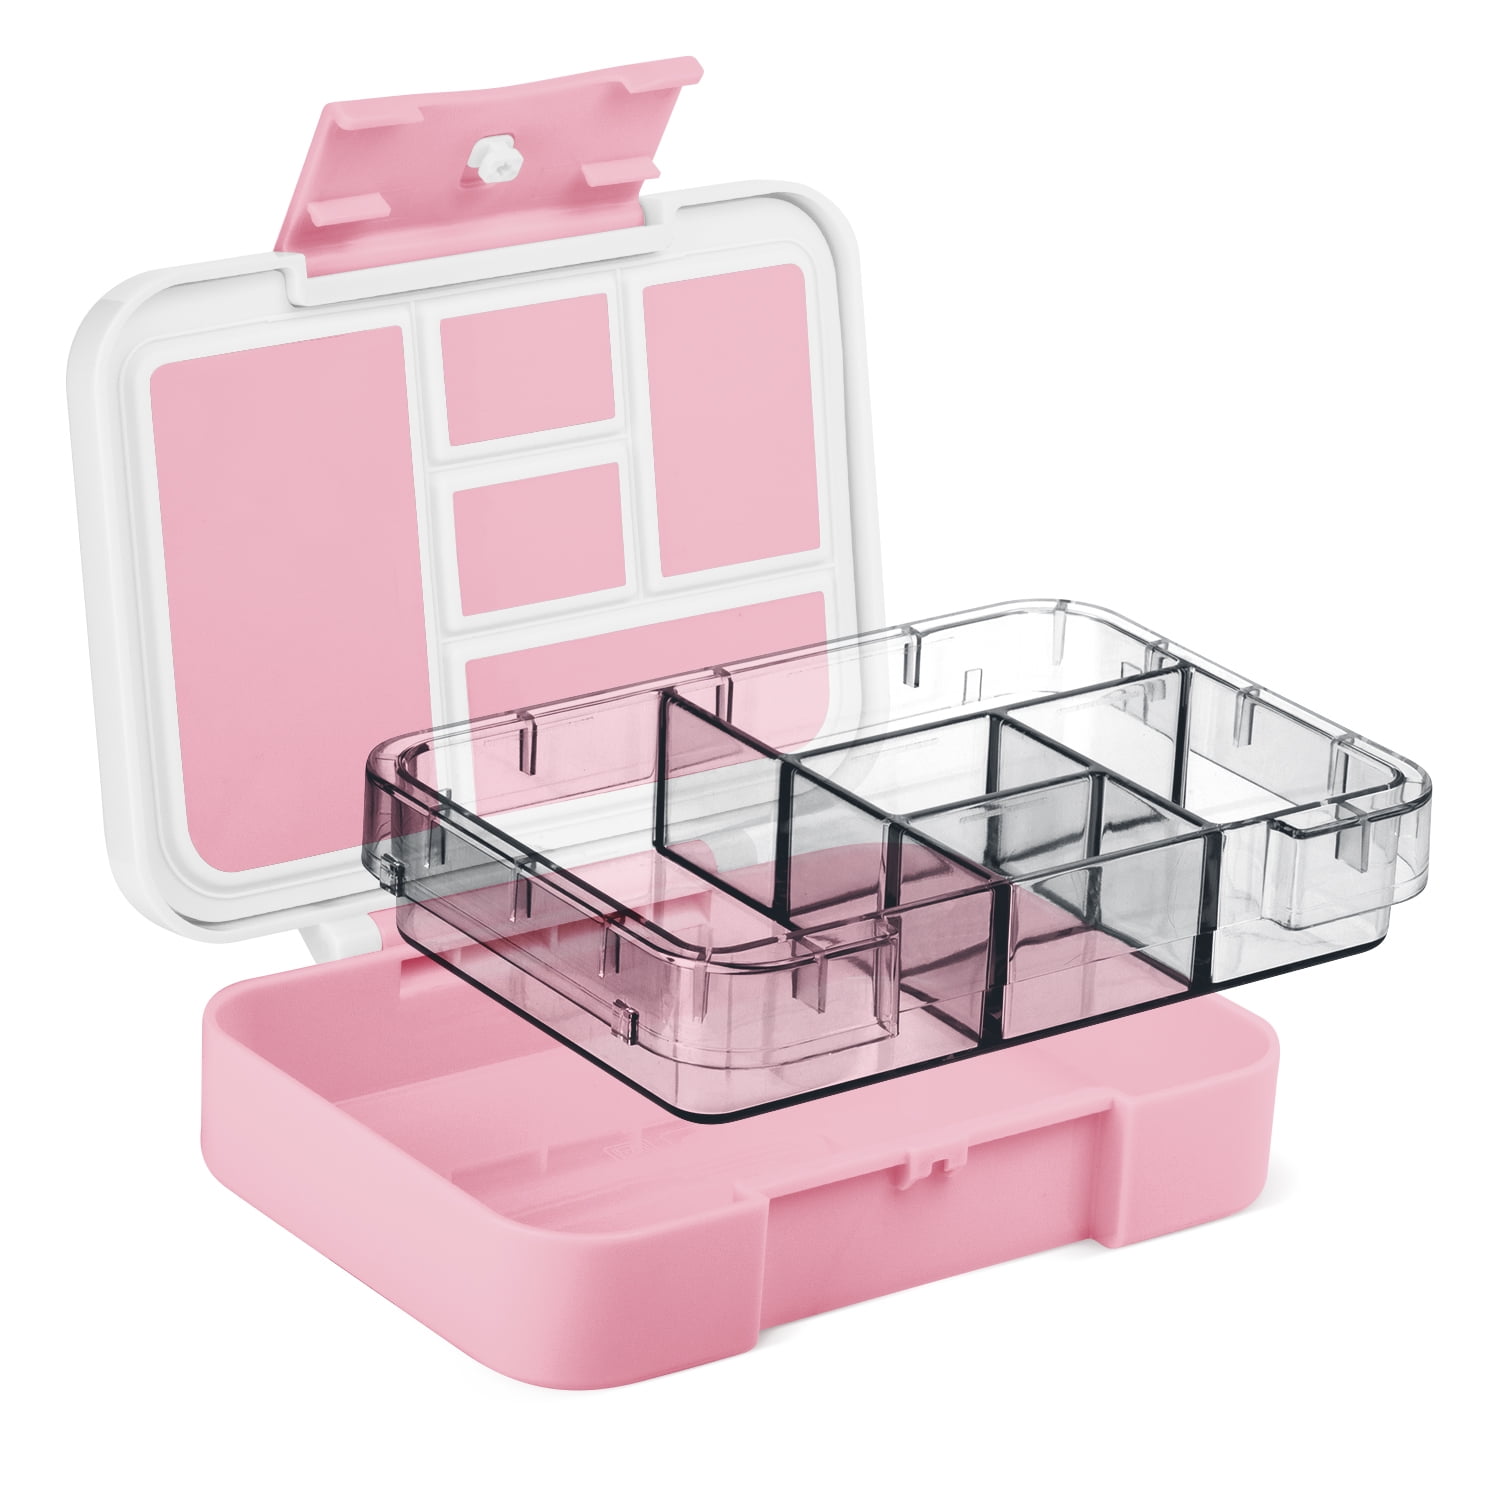 Porter Lunch Box, 3 Compartment Bento Box Style Portable Adult Lunch Box  with Sn